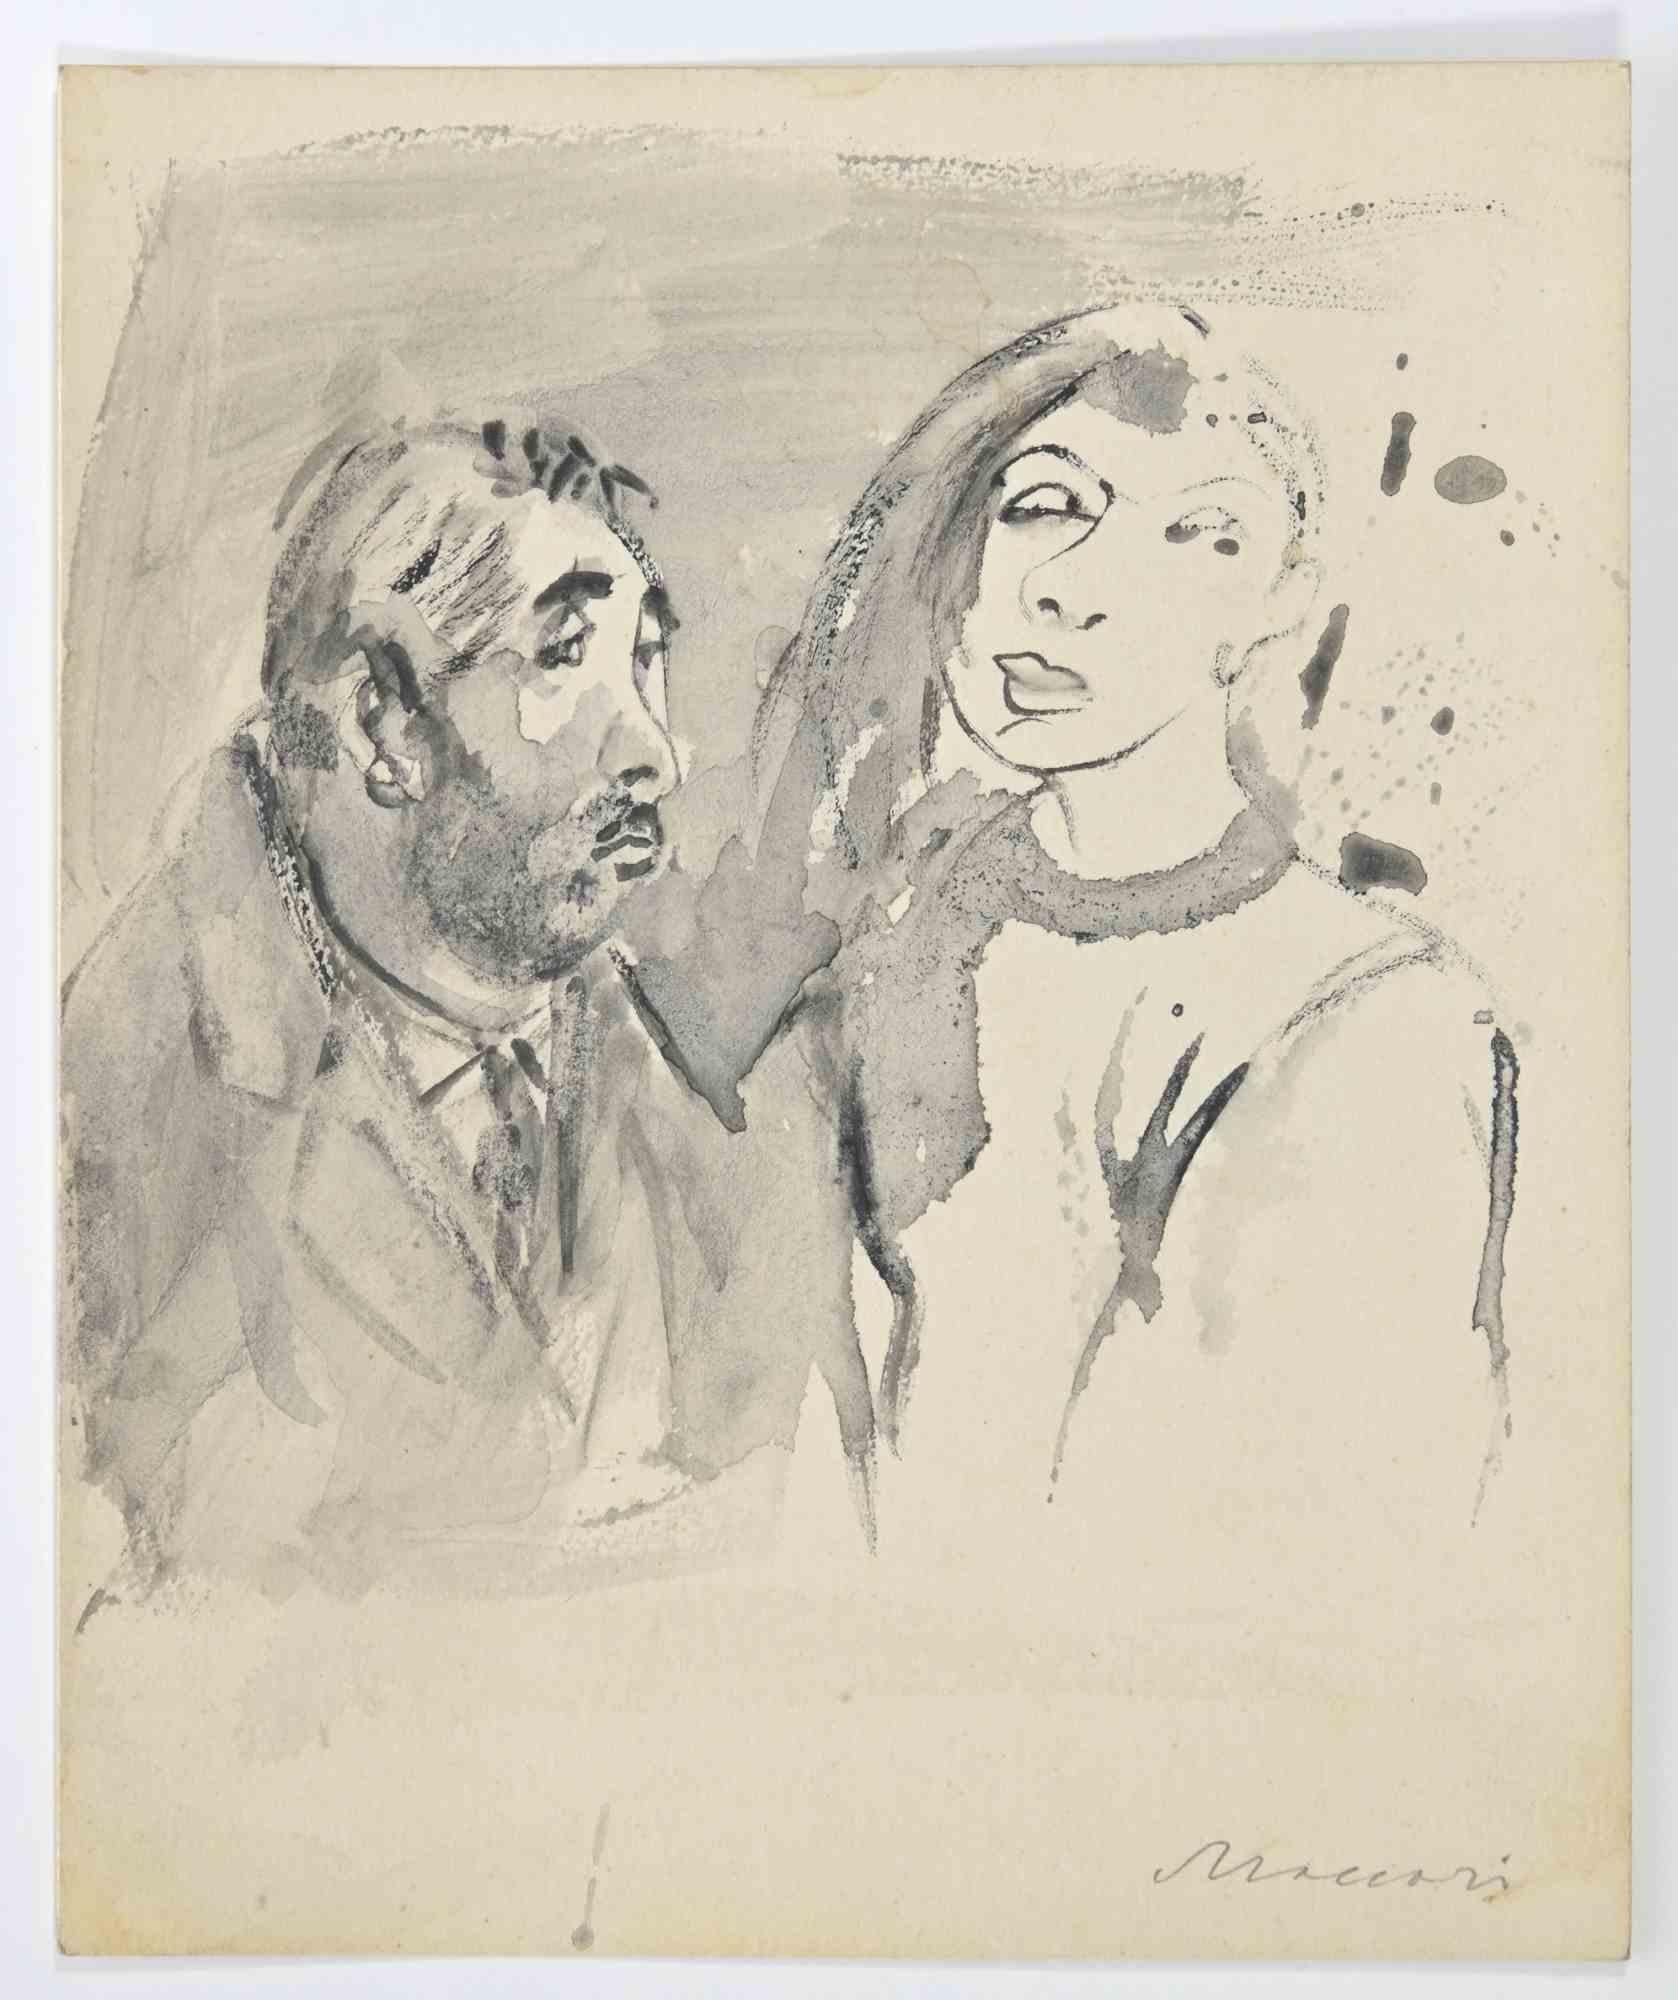 The Couple is a watercolor Drawing realized by Mino Maccari  (1924-1989) in 1940 ca.

Hand-signed on the lower margin.

Good condition.

Mino Maccari (Siena, 1924-Rome, June 16, 1989) was an Italian writer, painter, engraver and journalist, winner